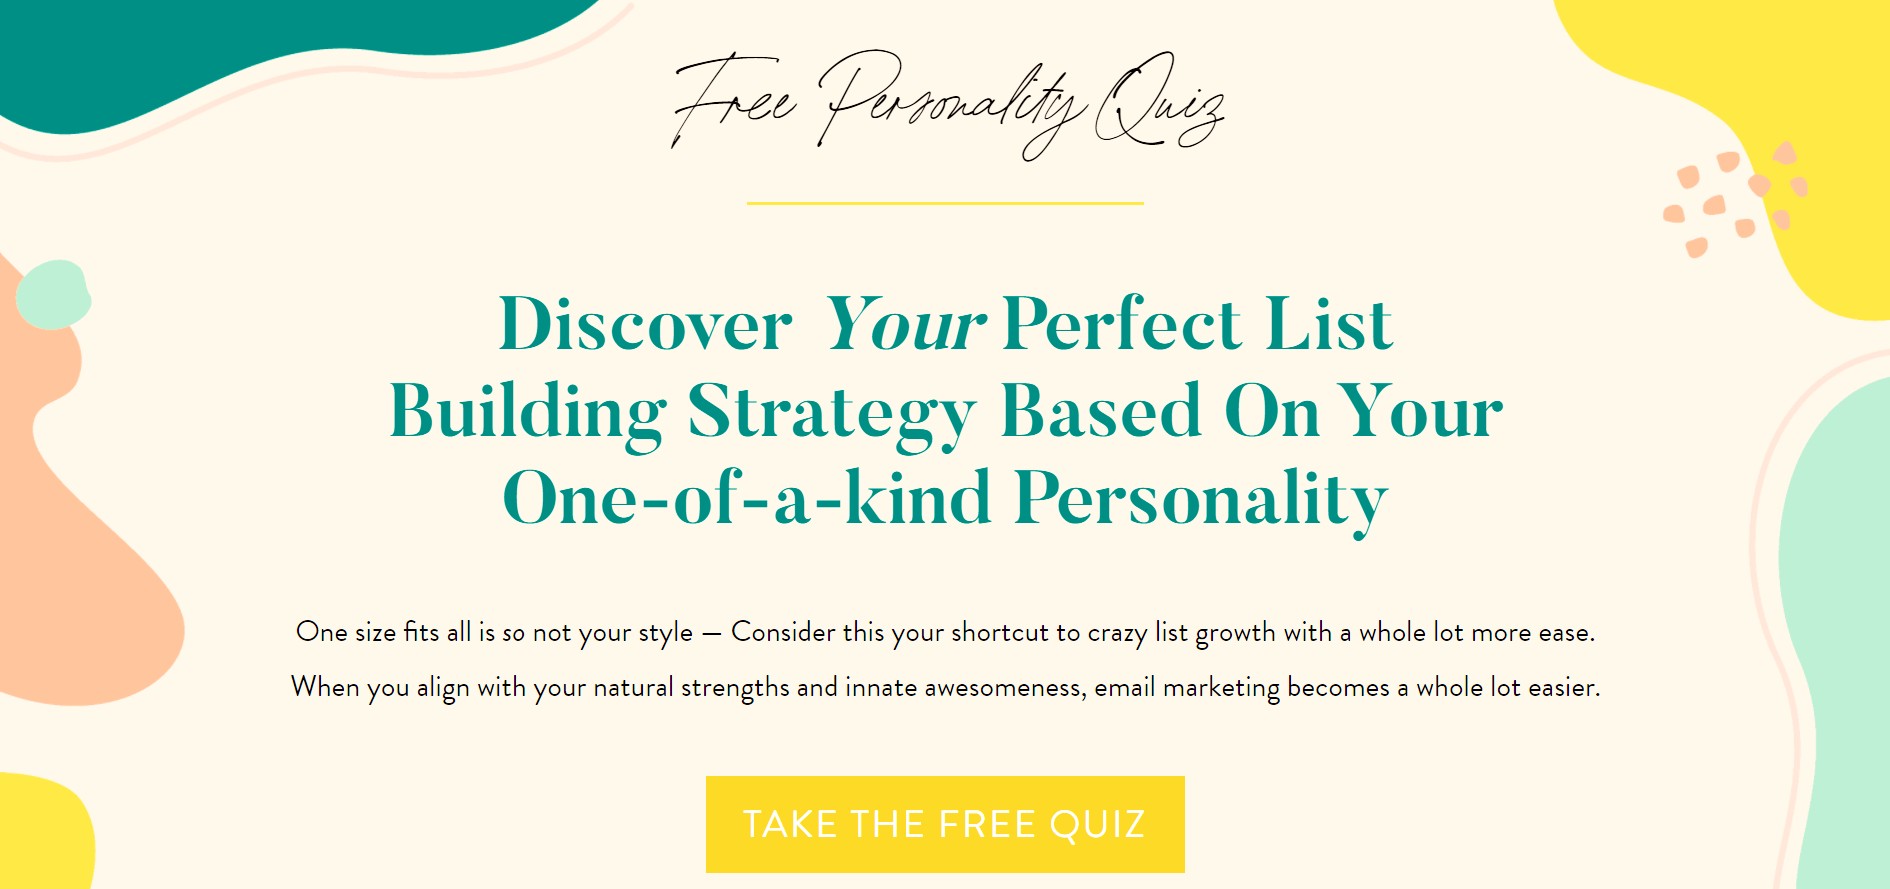 <img src="email.jpg" alt="email list based on personality"/> 